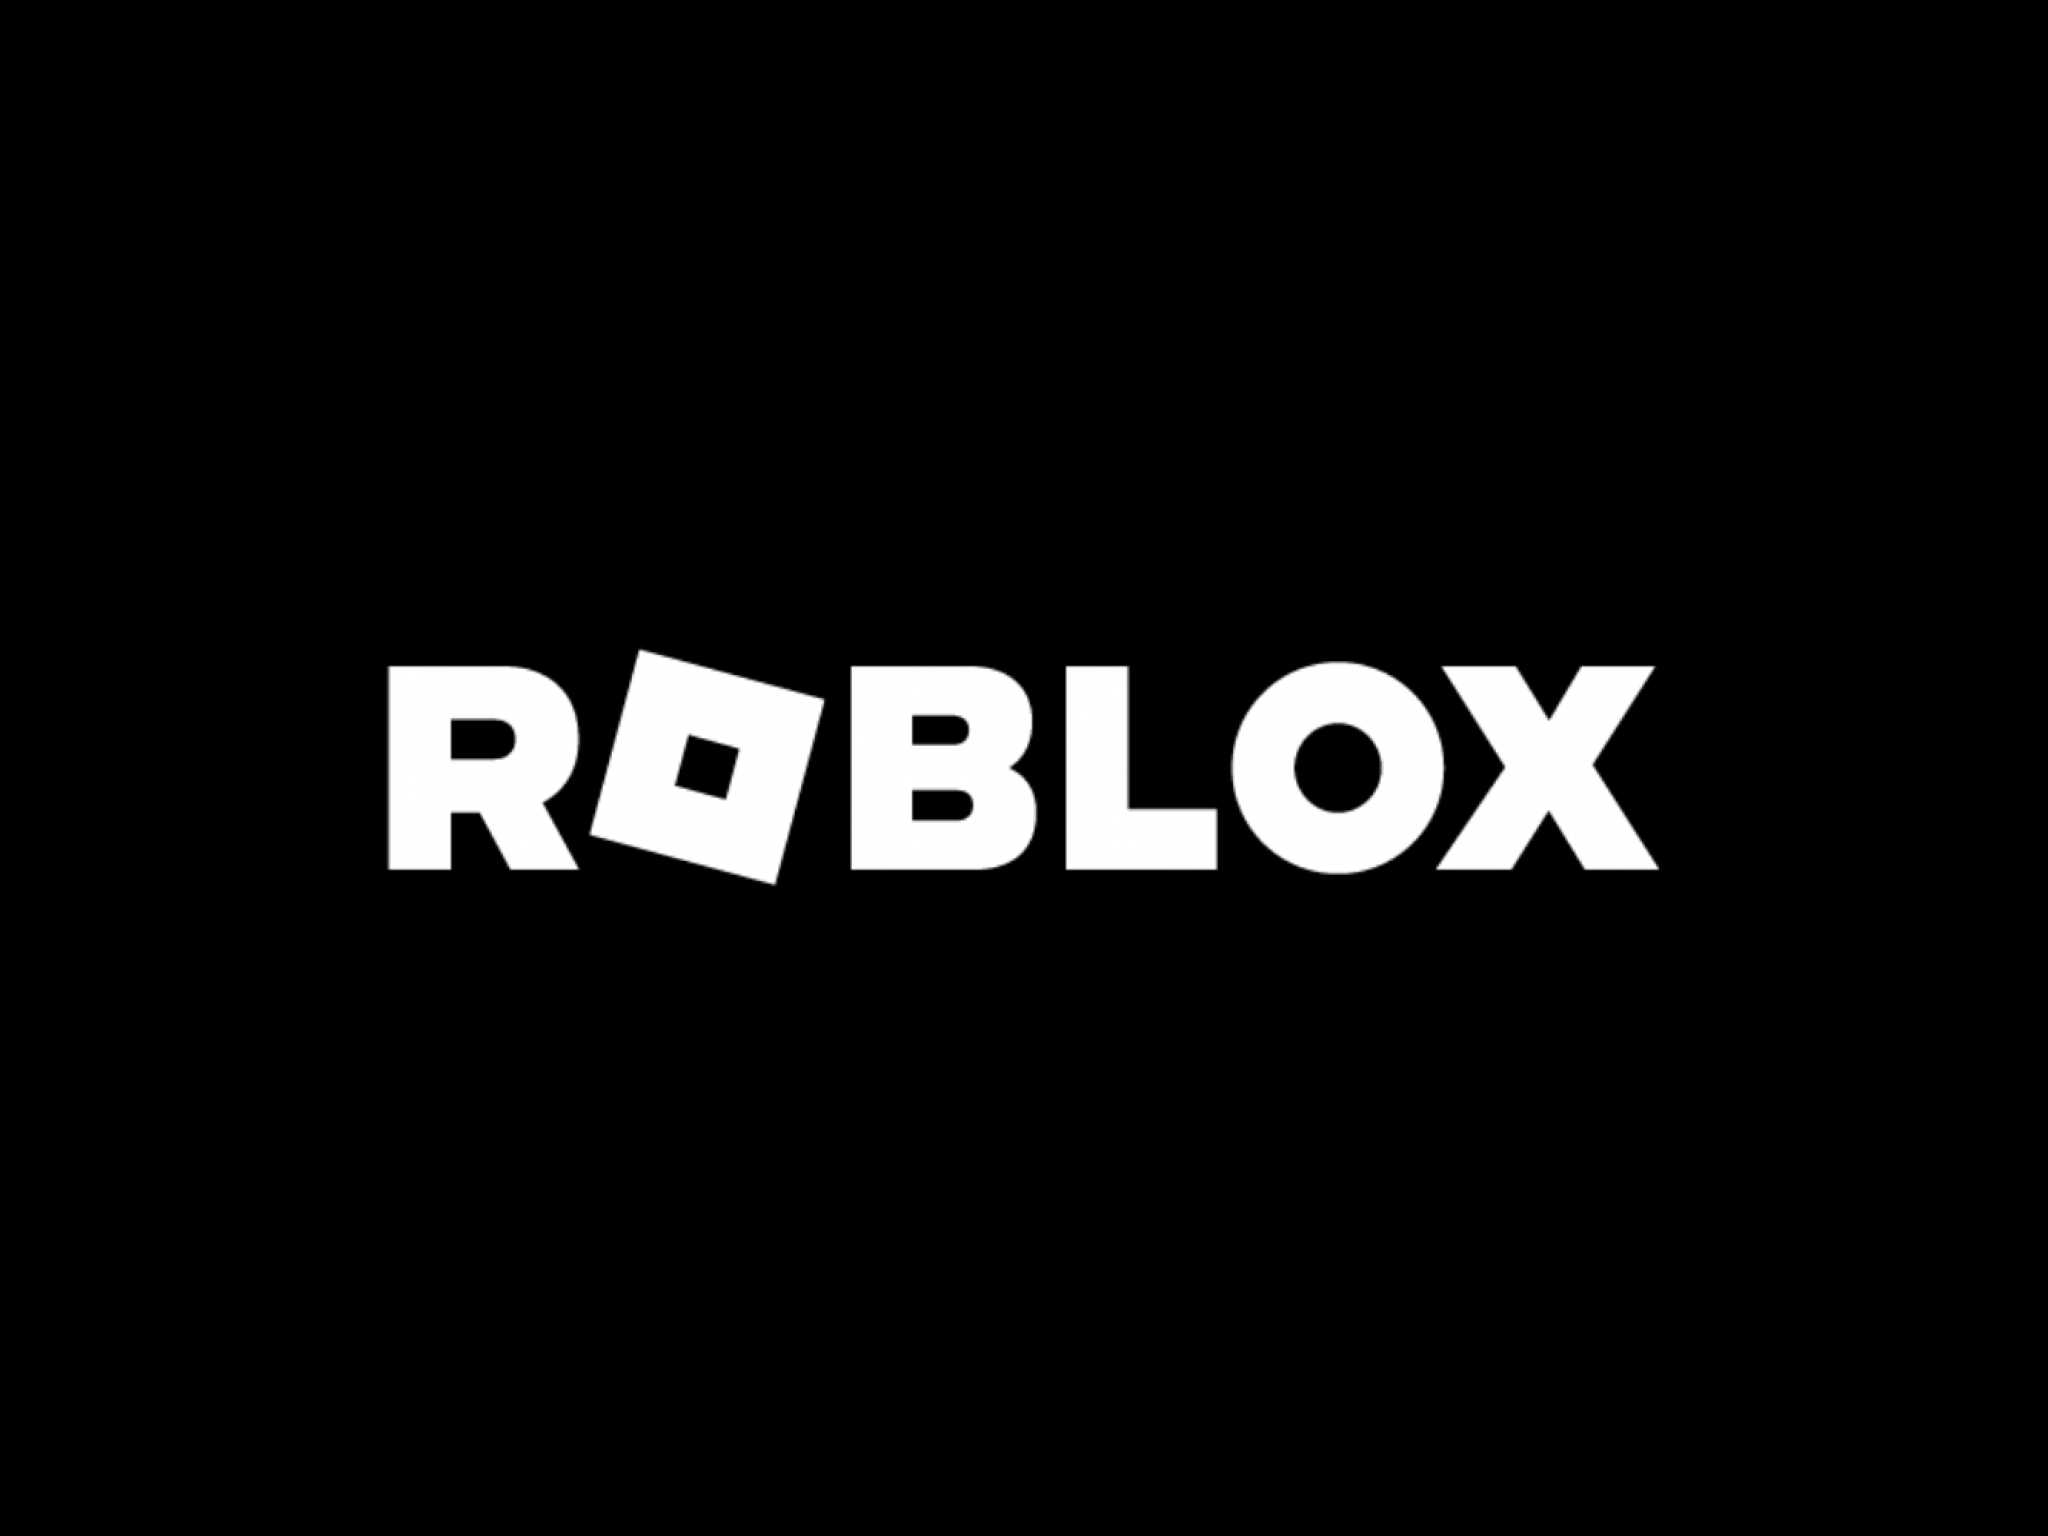 Why Roblox Stock Could Blast Higher Following Spotify Debut - Roblox  (NYSE:RBLX) - Benzinga